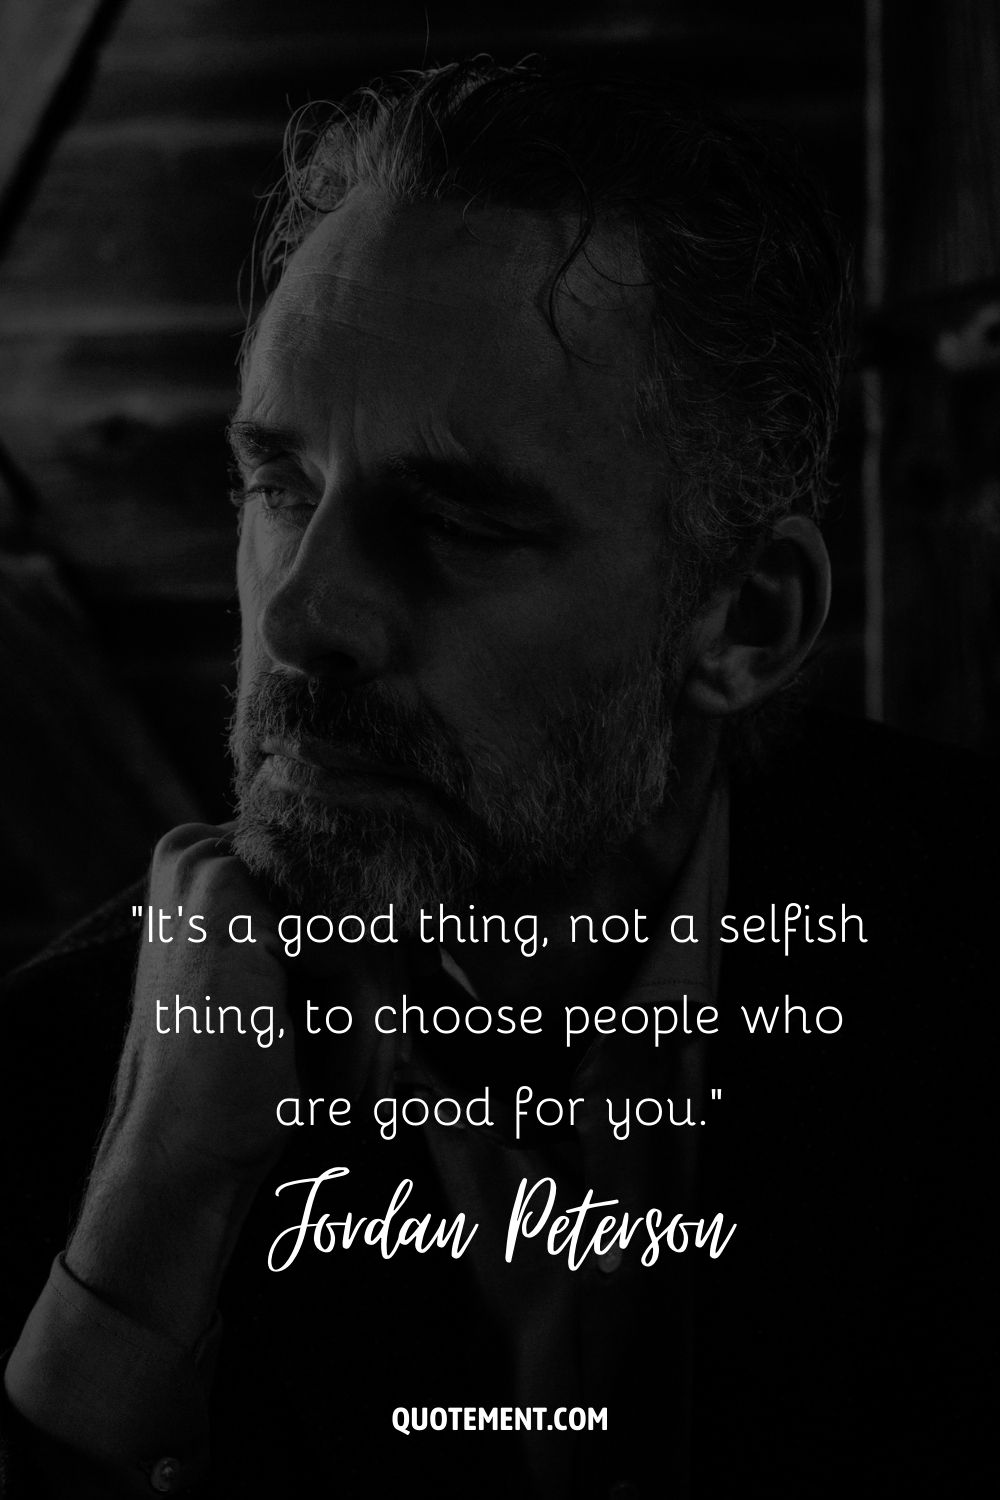 It’s a good thing, not a selfish thing, to choose people who are good for you